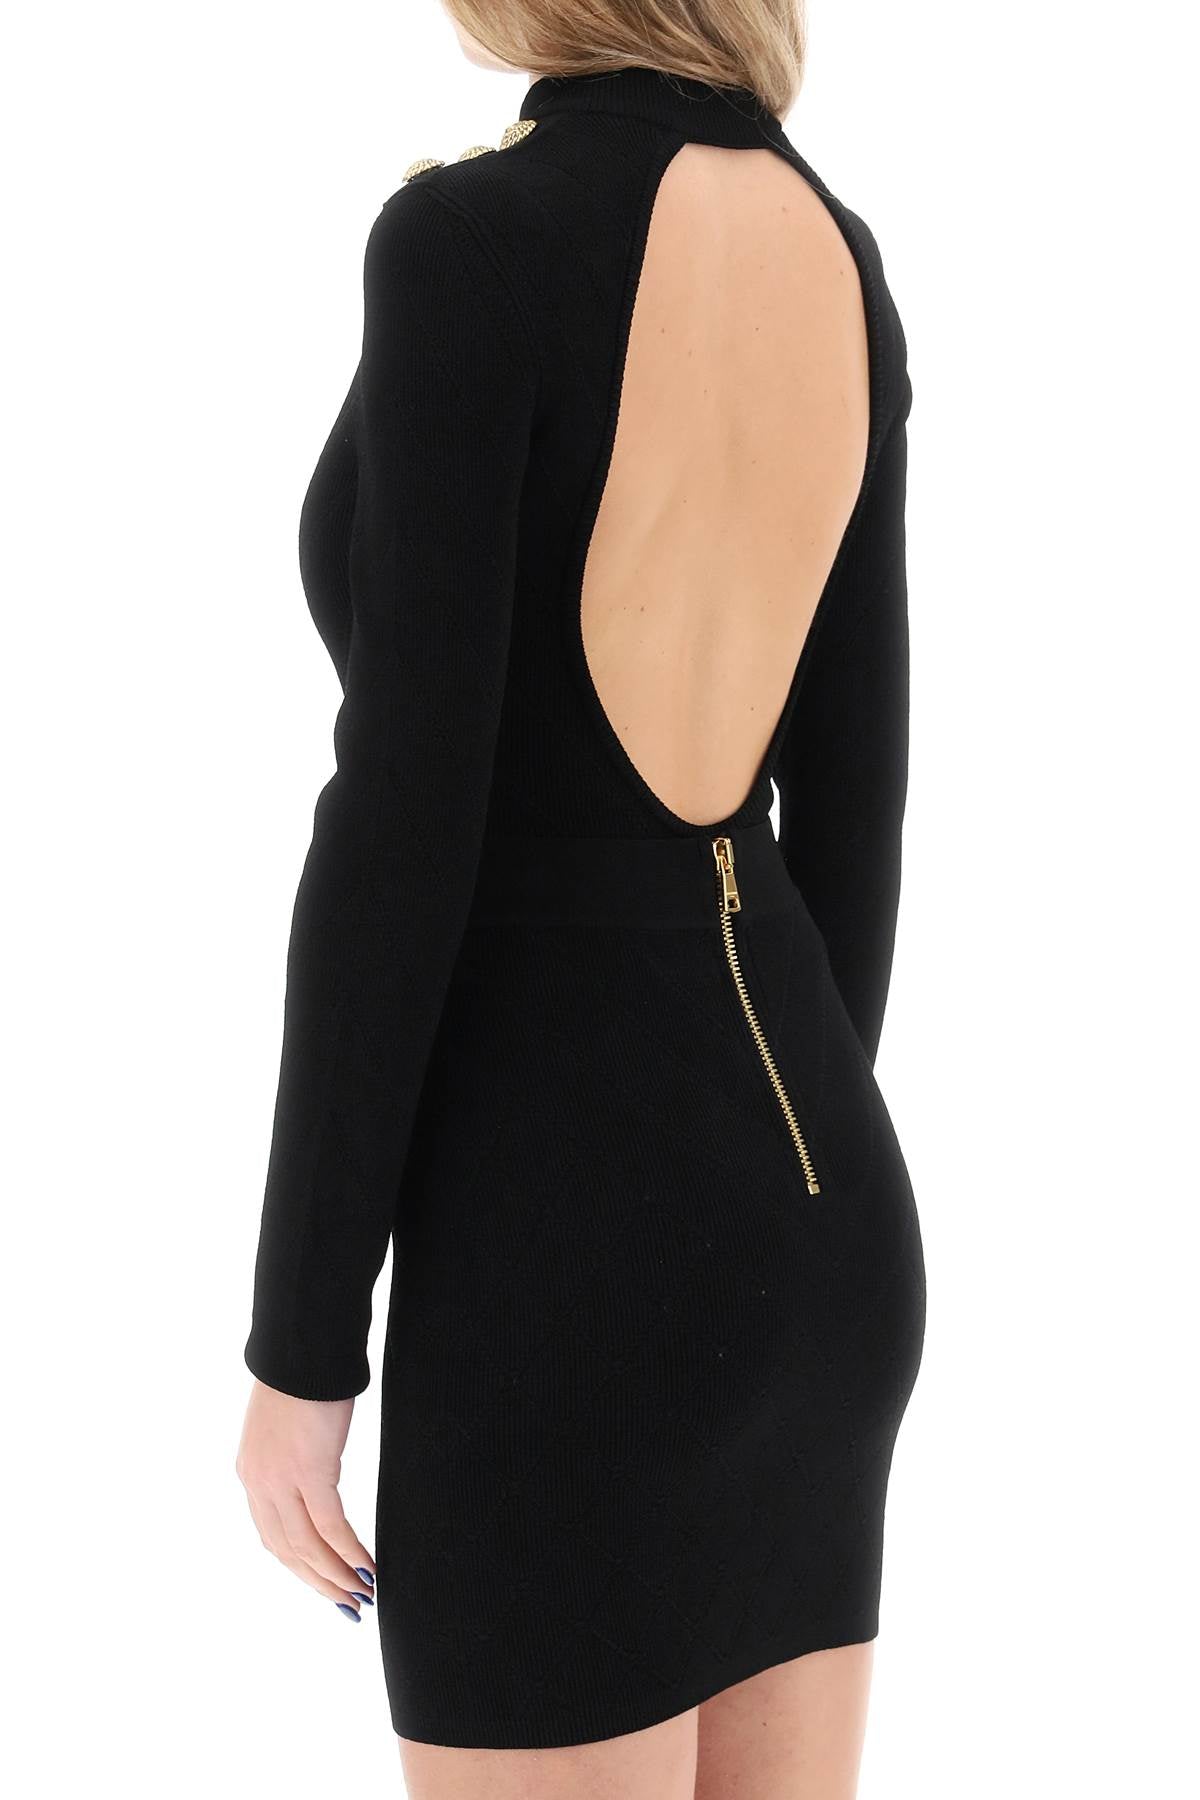 Shop Balmain Classic Black Knit Bodysuit With Embossed Buttons For Women